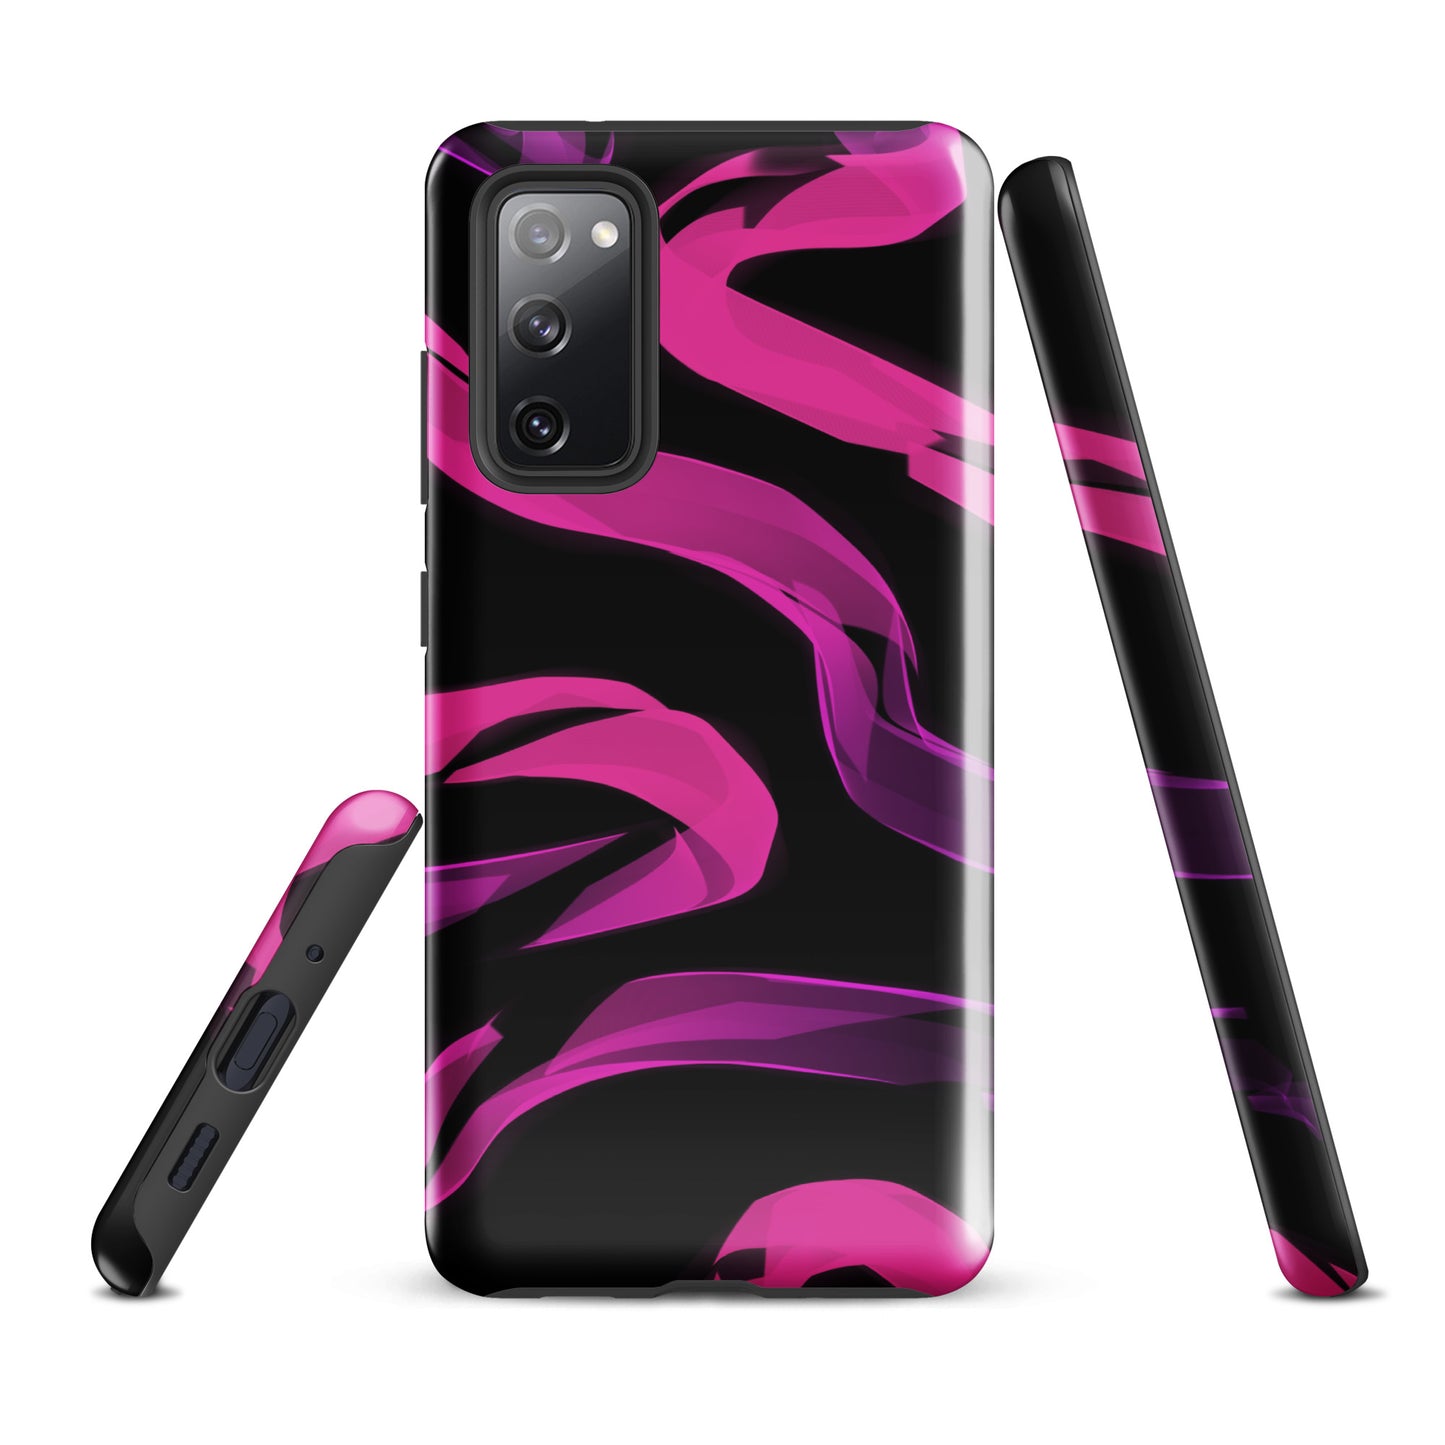 A Bright Pink Neon Sketch Case for the Samsung Galaxy S20 FE